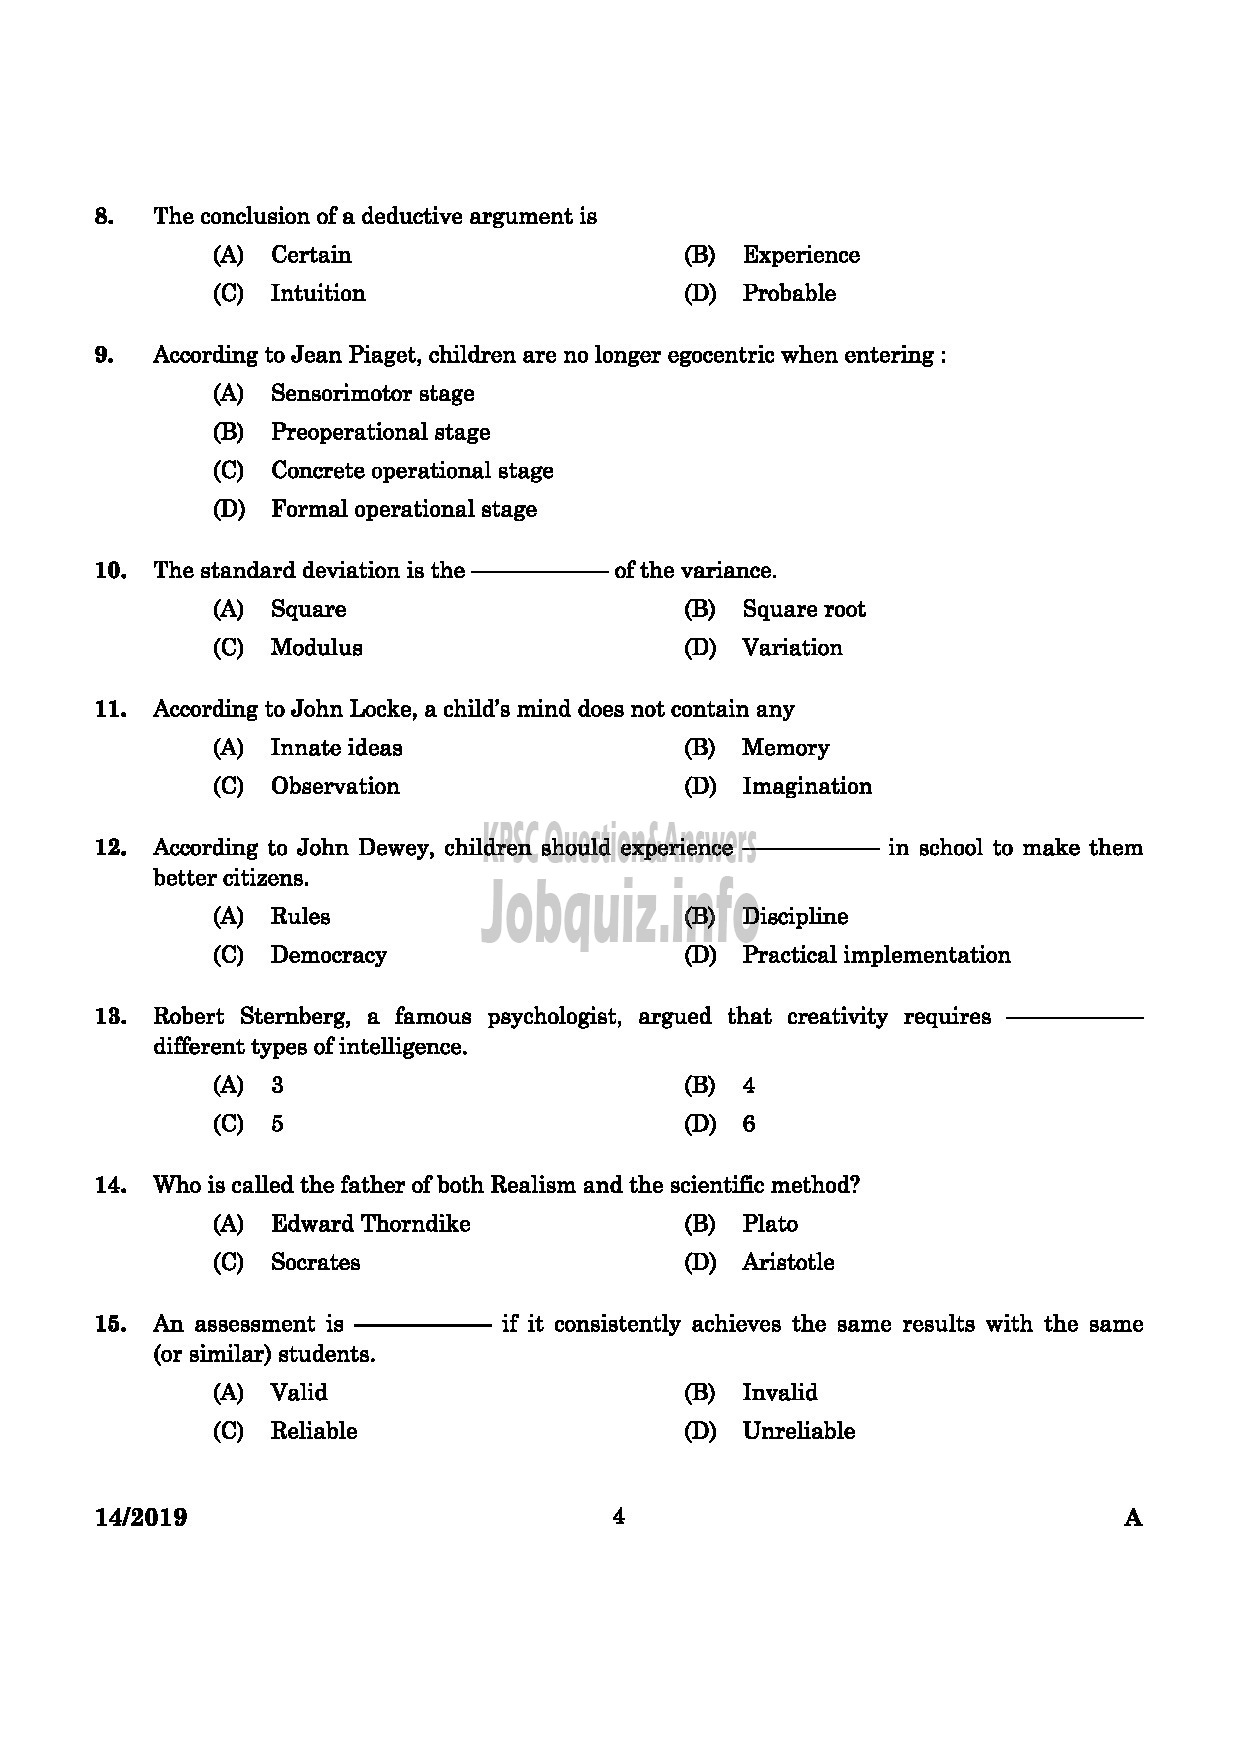 Kerala PSC Question Paper - SPECIAL TEACHER HOME FOR MENTALLY DEFICIENT CHILDREN SOCIAL JUSTICE DEPARTMENT-2